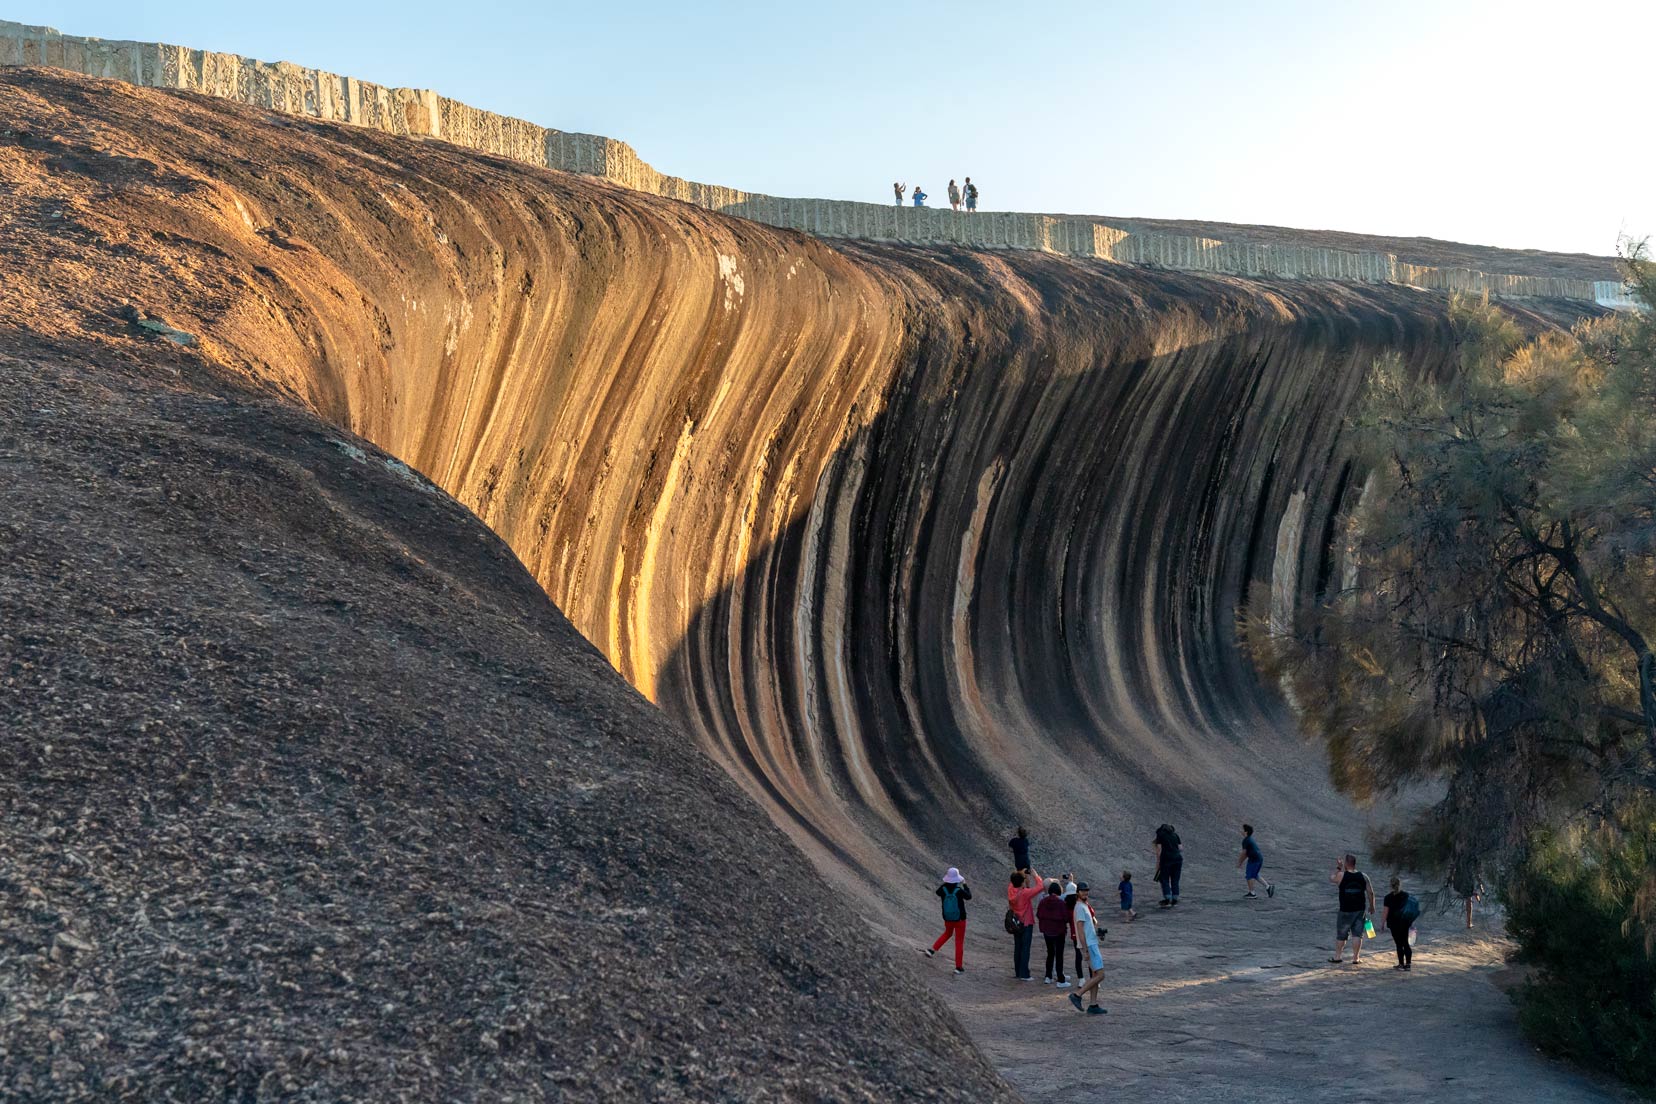 Wave rock shaped like a wave with sun hitting part of it and a few people at its base